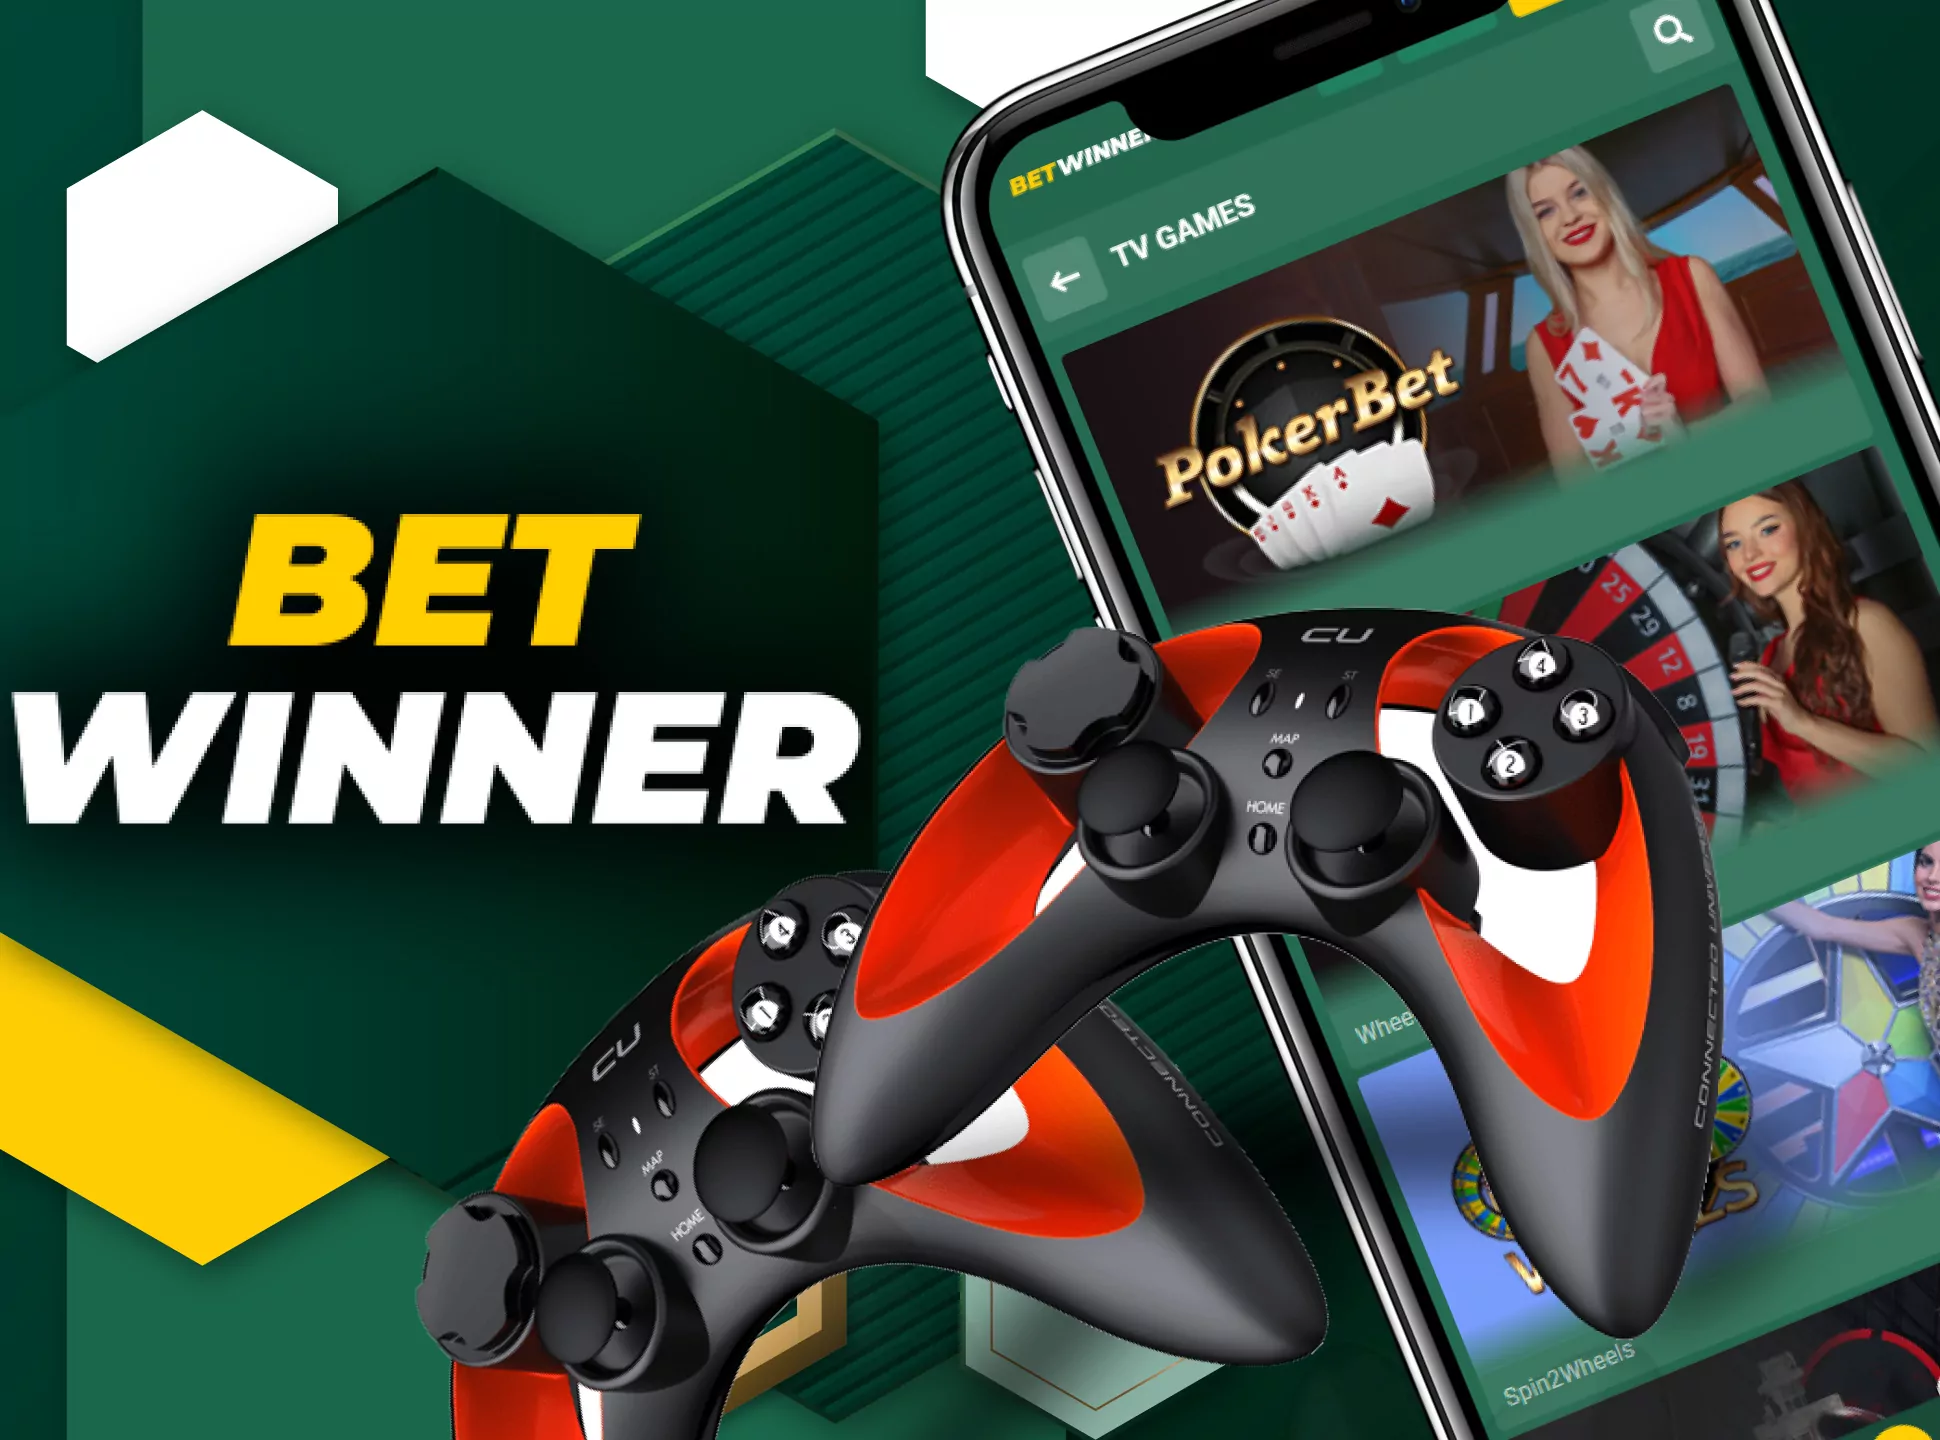 Betwinner also has various TV games.